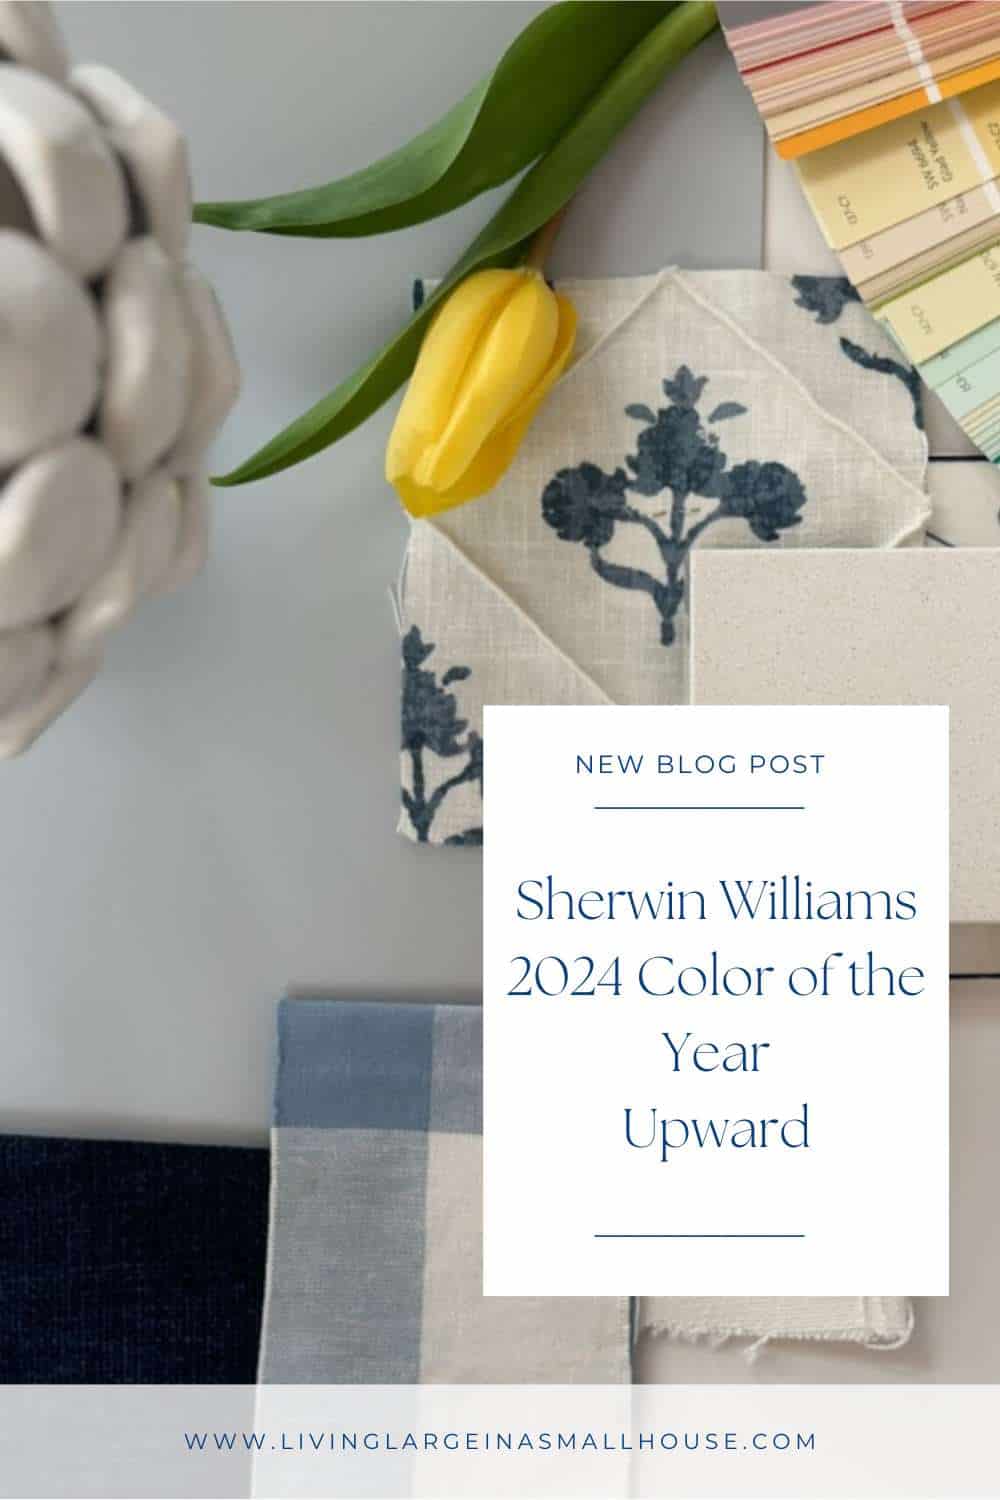 Pinterest Graphic with Living Room Mood board with overlay that reads "Sherwin-Williams" color of the year 2024 - Upward"